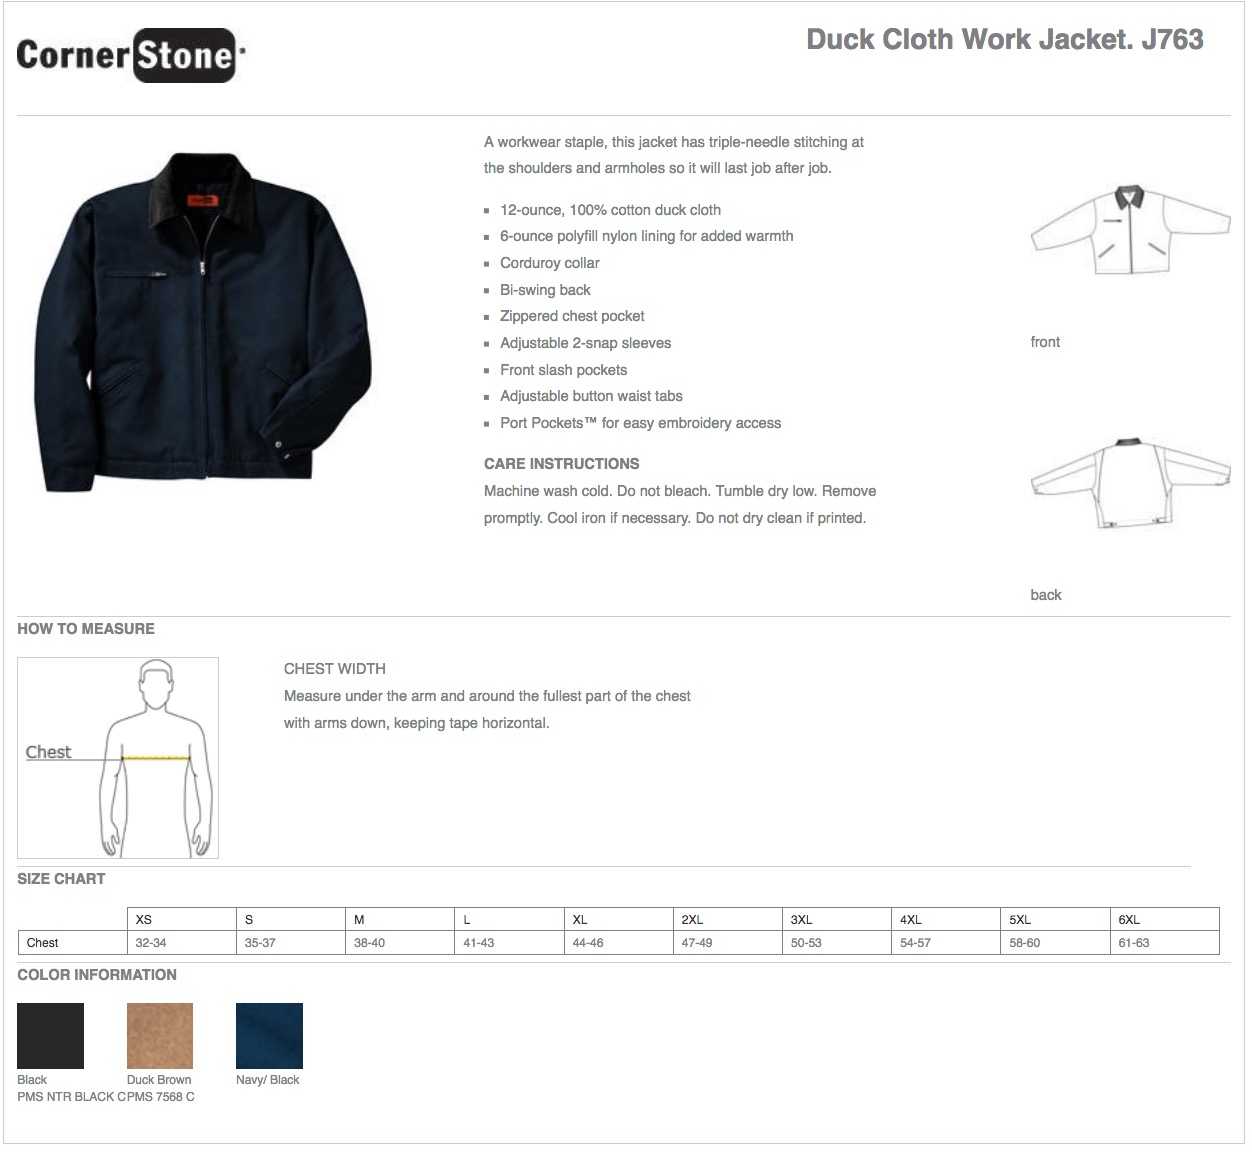 Size Chart for the CornerStone Duck Cloth Work Jacket J763